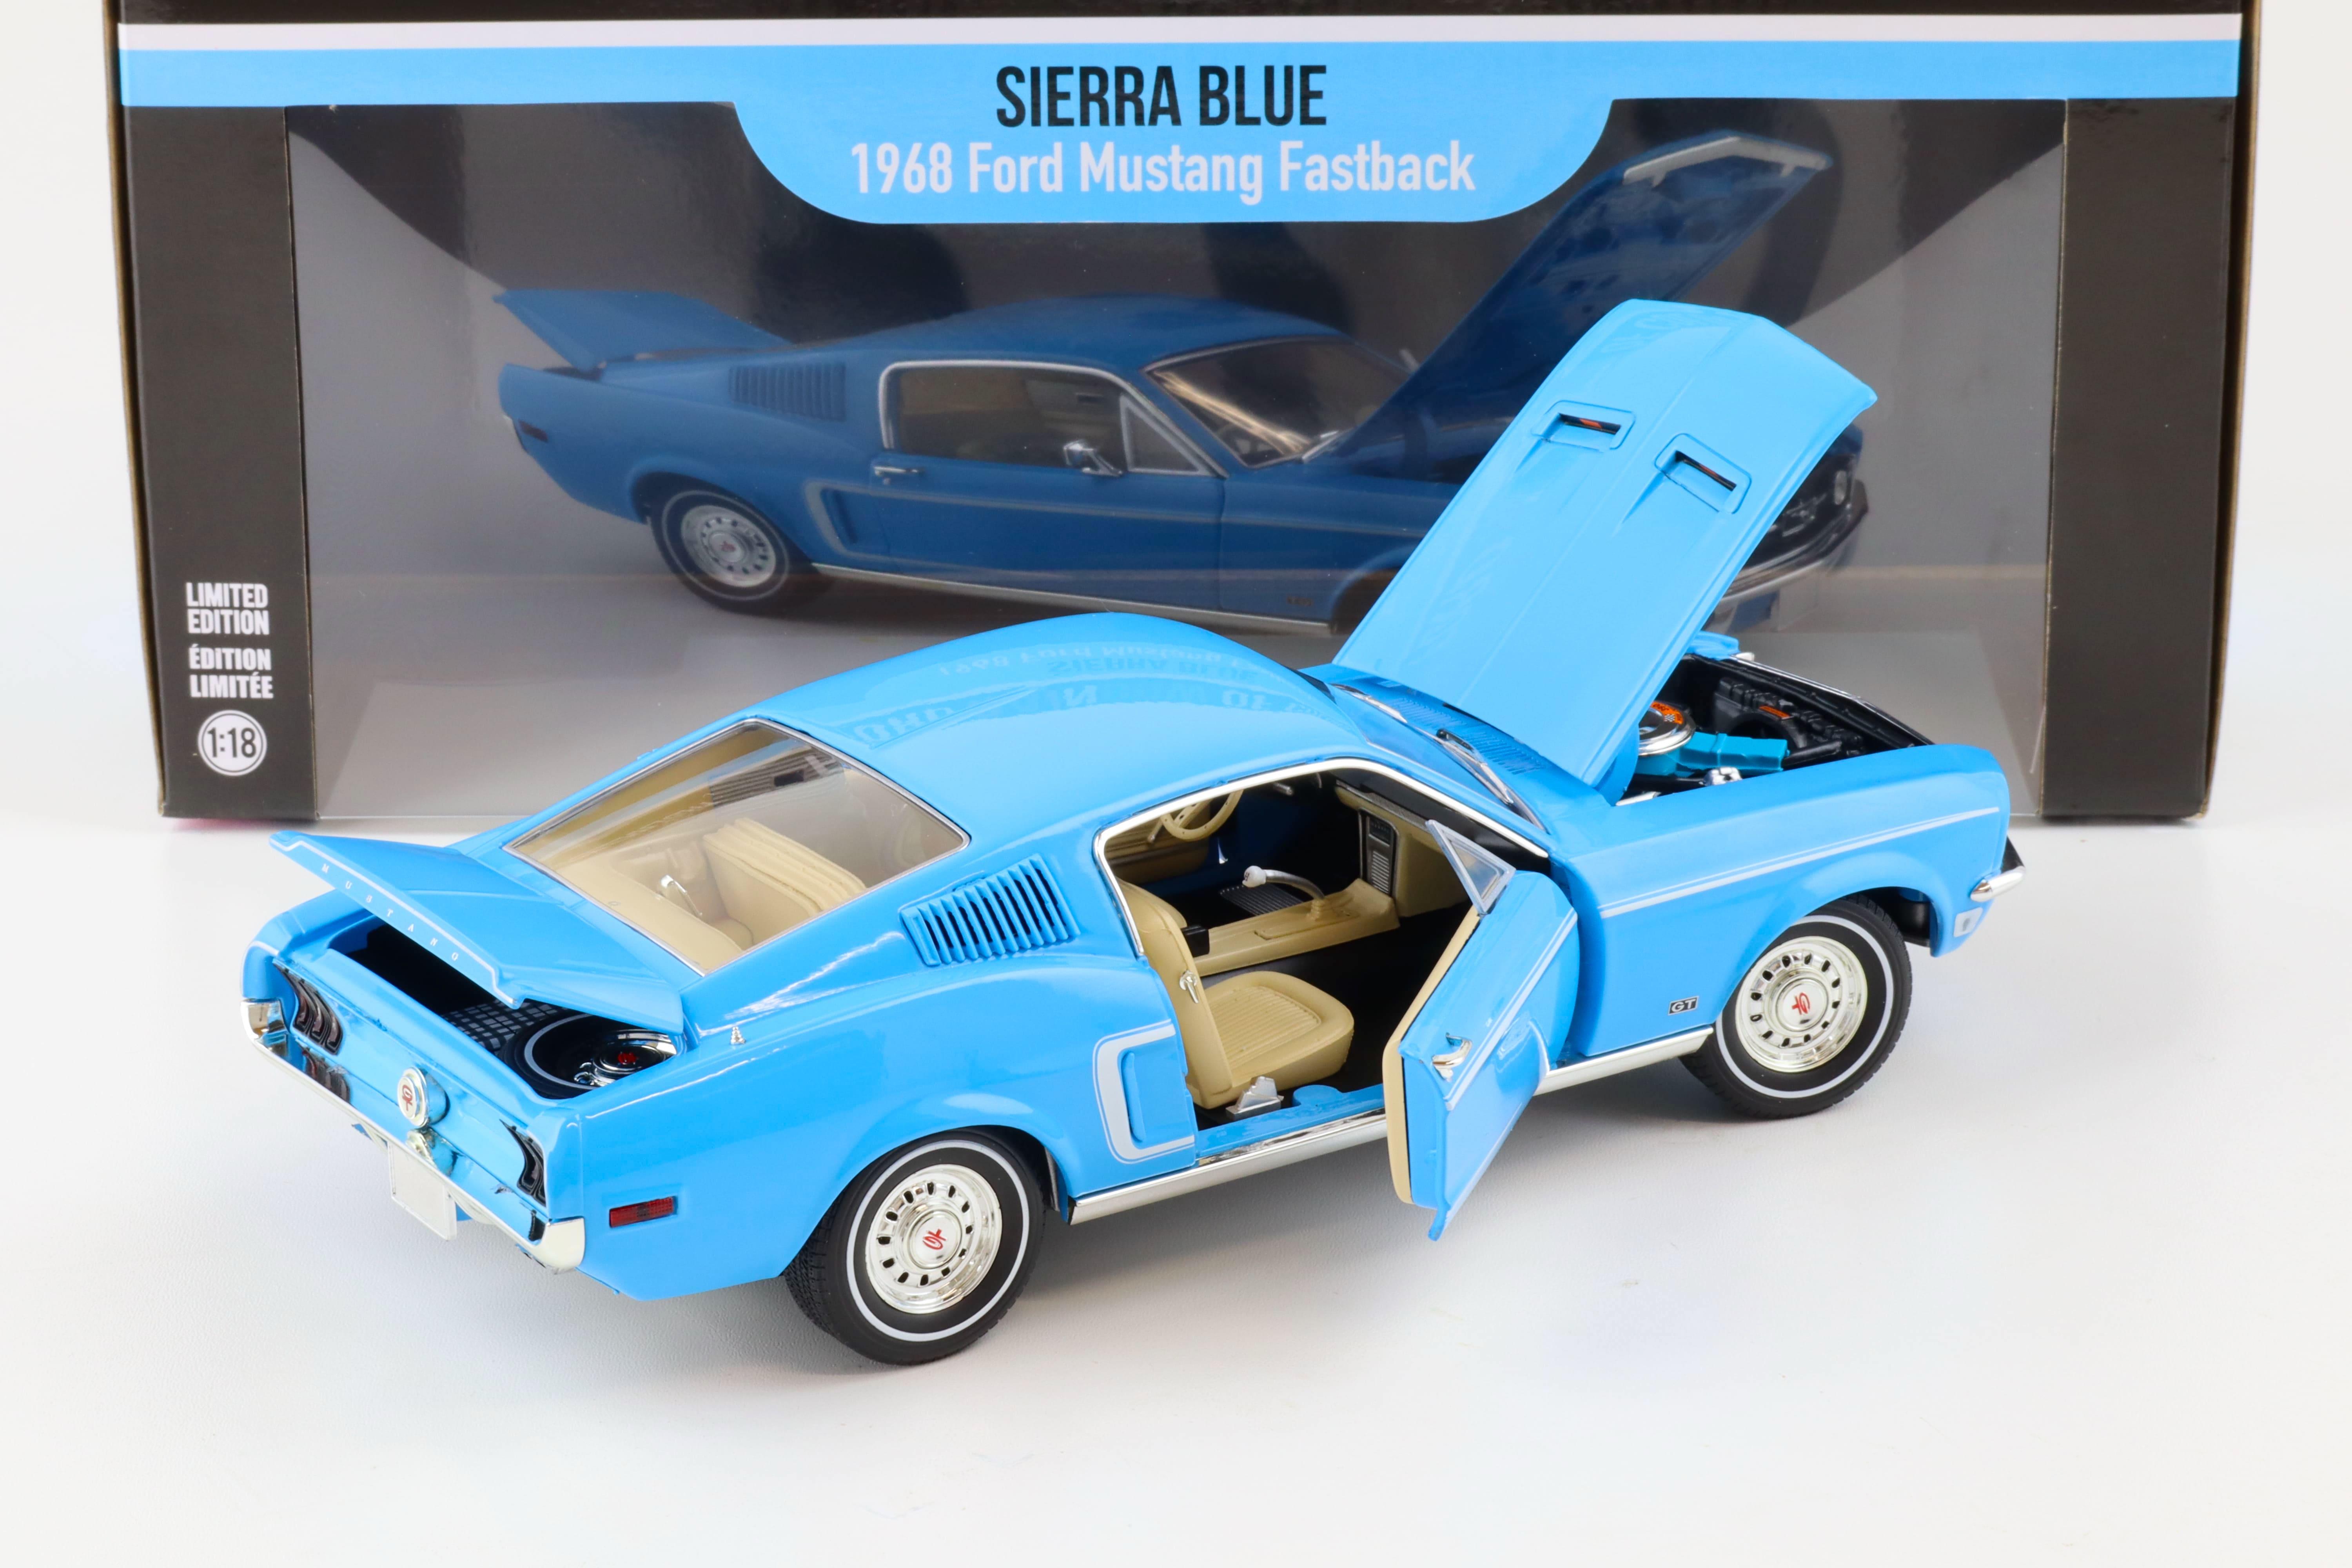 1:18 Greenlight 1968 Ford Mustang Fastback Coupe Sierra blue